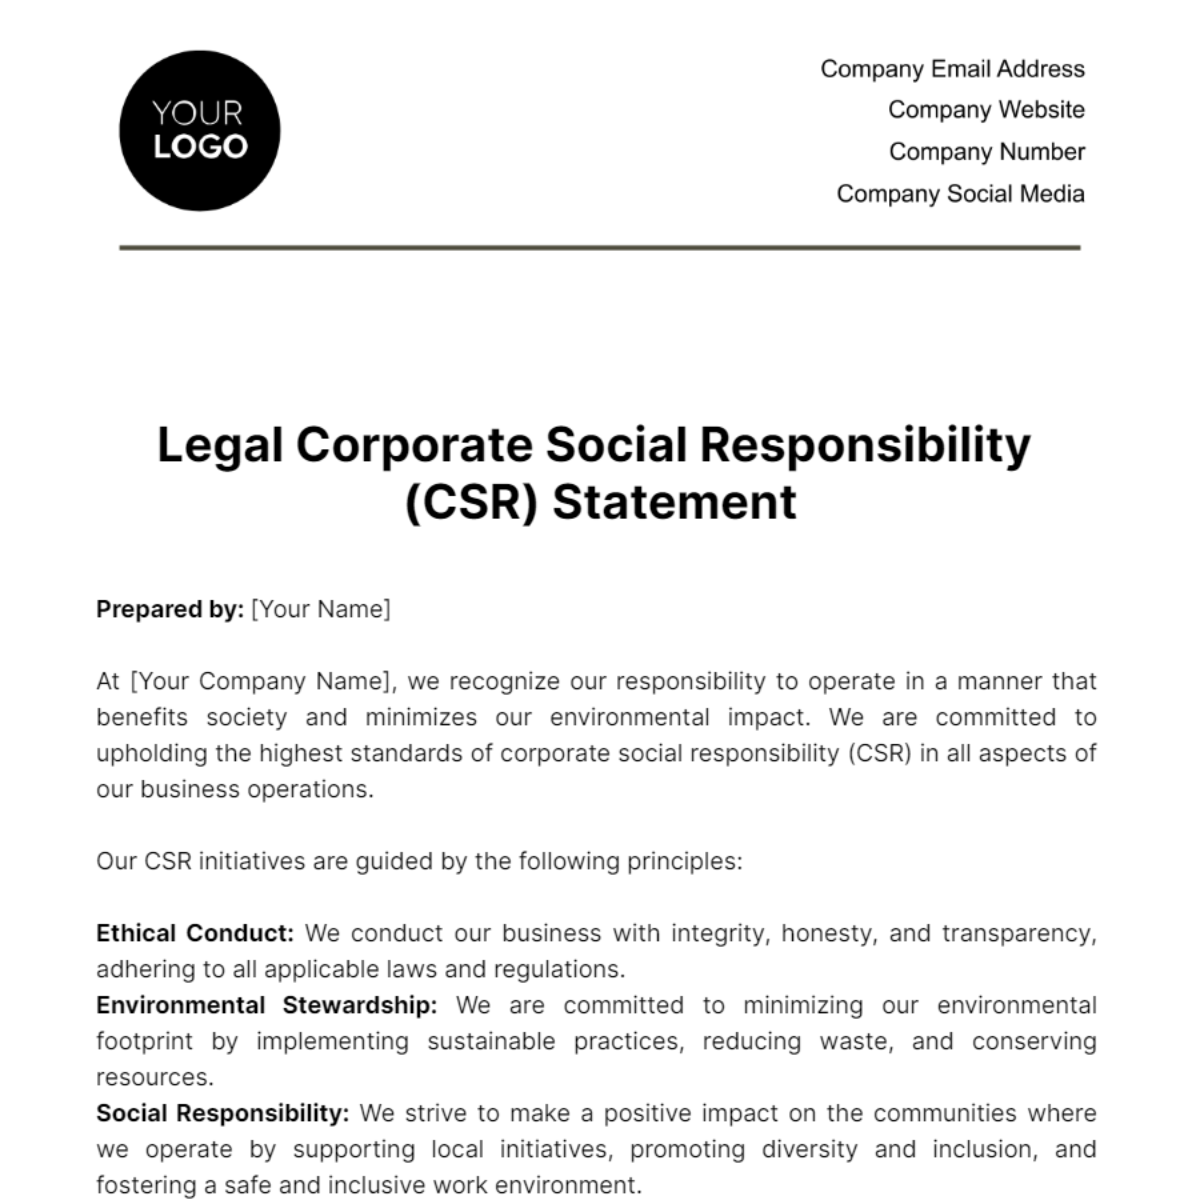 Free Legal Corporate Corporate Social Responsibility (CSR) Statement Template